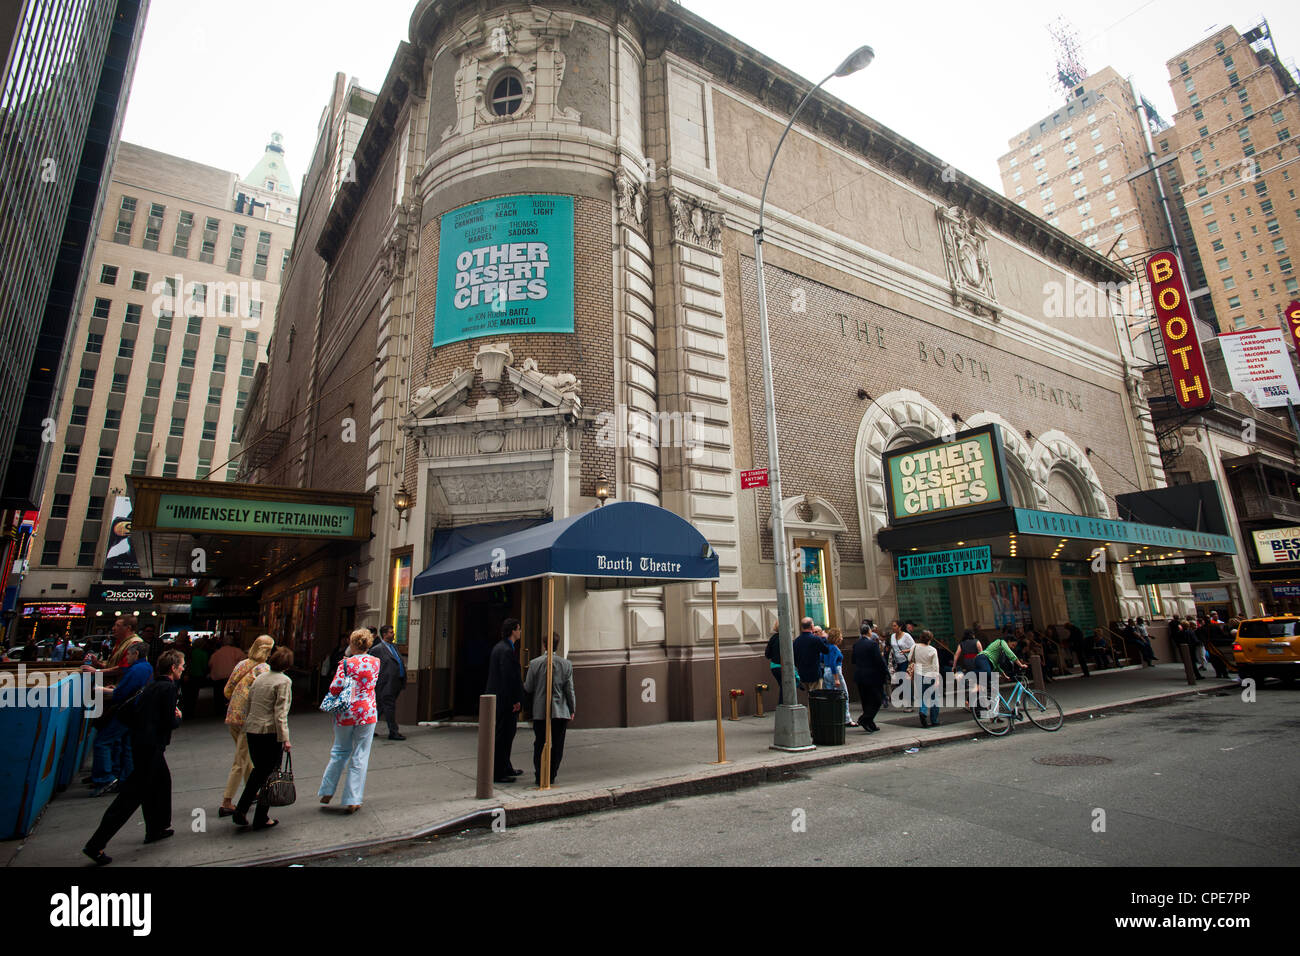 Theater lovers just before curtain outside the Booth Theatre where Other Desert Cities is performing Stock Photo